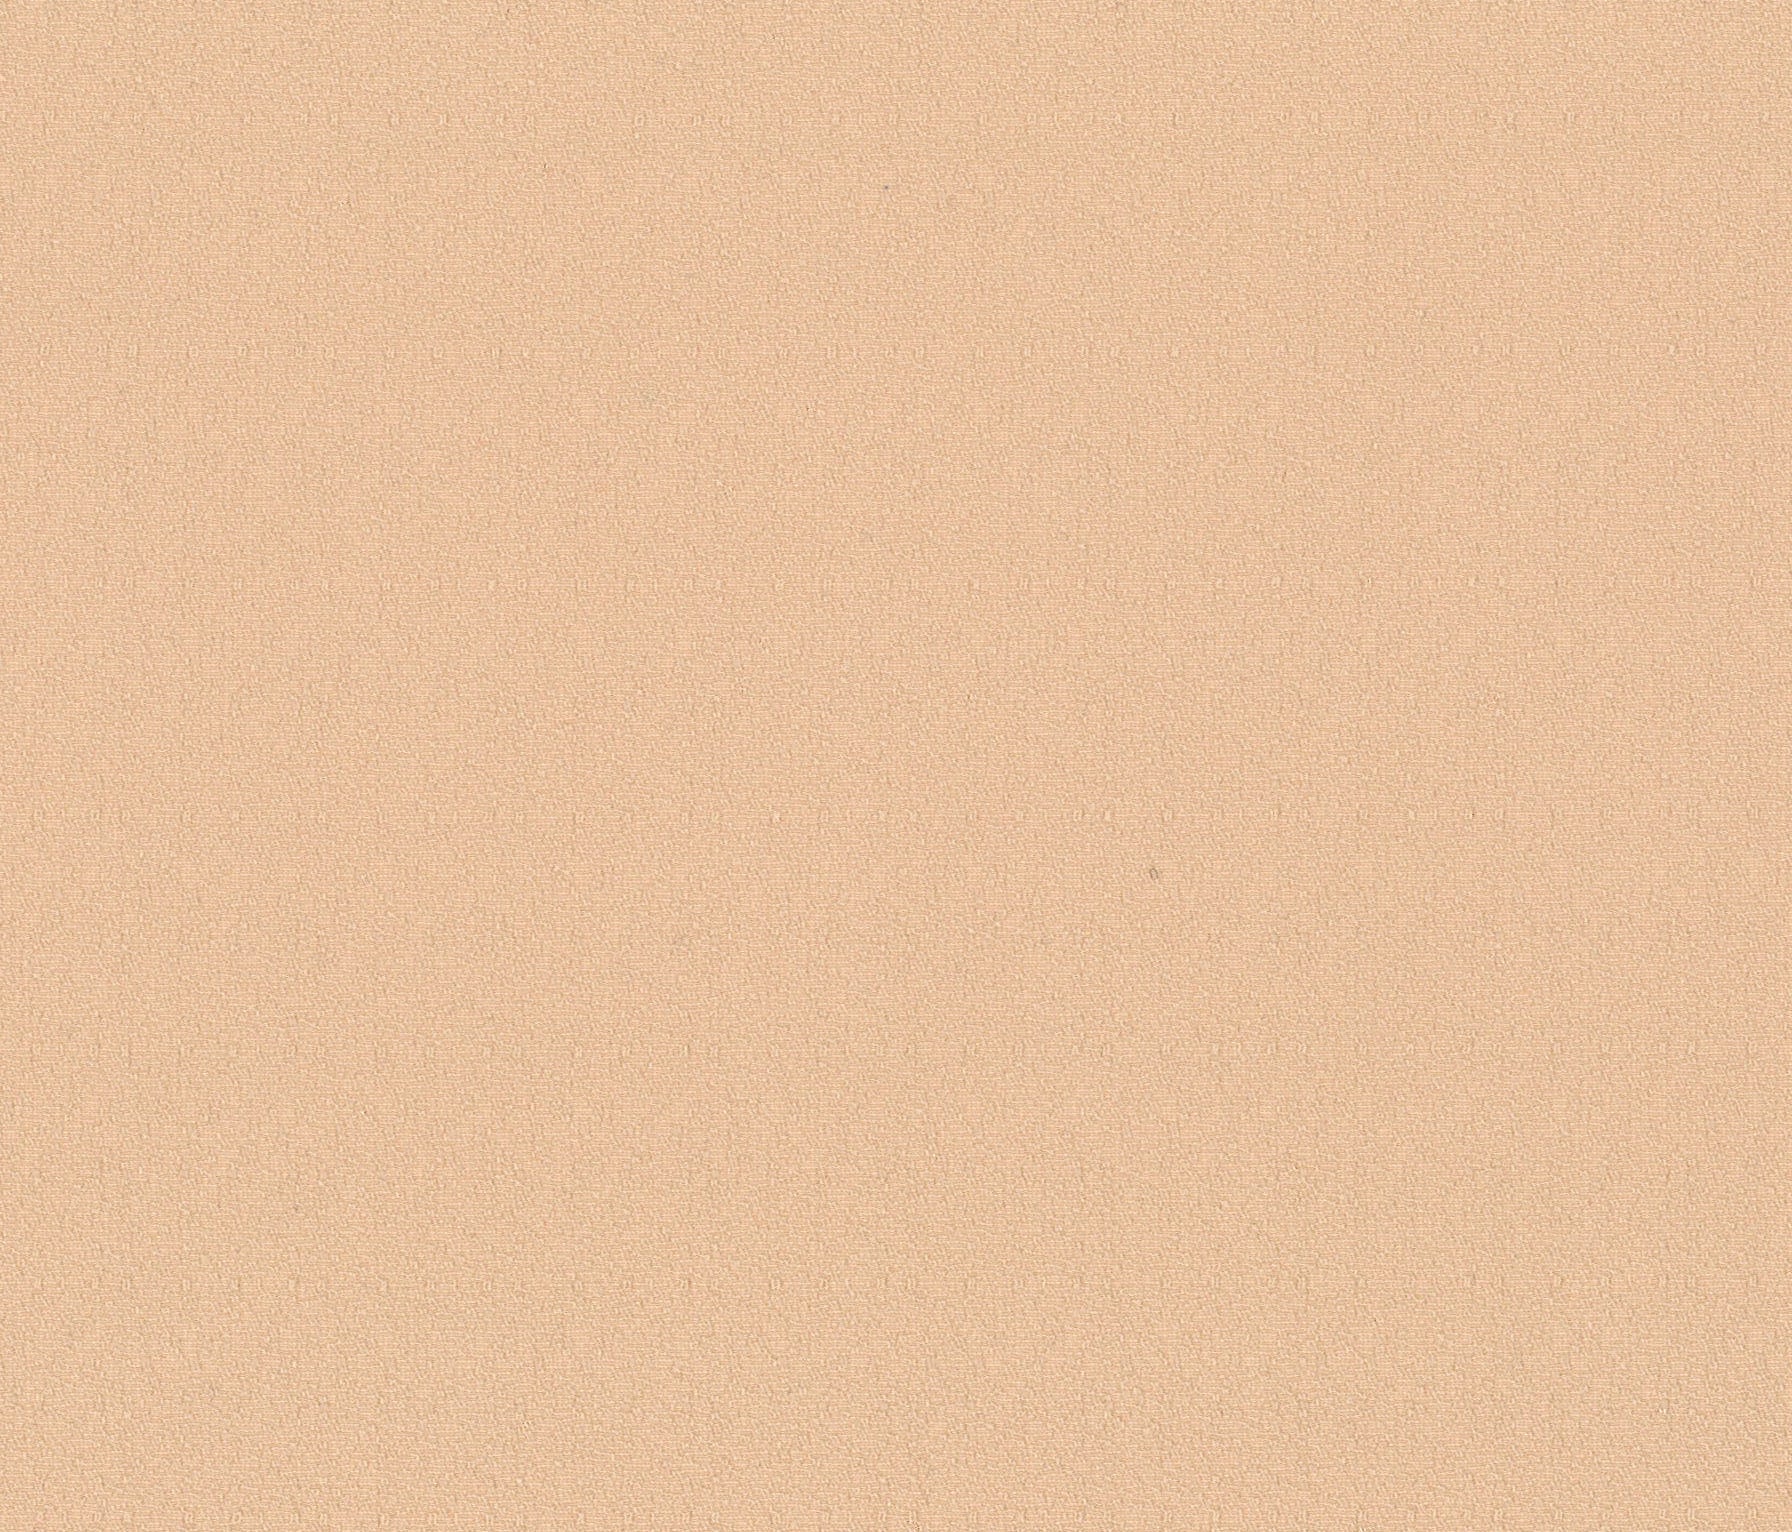 34018-02 Apricot Montel Crepe Pain Dyed Blend 223g/yd 45&quot; beige crepe plain dyed polyester spandex woven Solid Color, Crepe - knit fabric - woven fabric - fabric company - fabric wholesale - fabric b2b - fabric factory - high quality fabric - hong kong fabric - fabric hk - acetate fabric - cotton fabric - linen fabric - metallic fabric - nylon fabric - polyester fabric - spandex fabric - chun wing hing - cwh hk - fabric worldwide ship - 針織布 - 梳織布 - 布料公司- 布料批發 - 香港布料 - 秦榮興